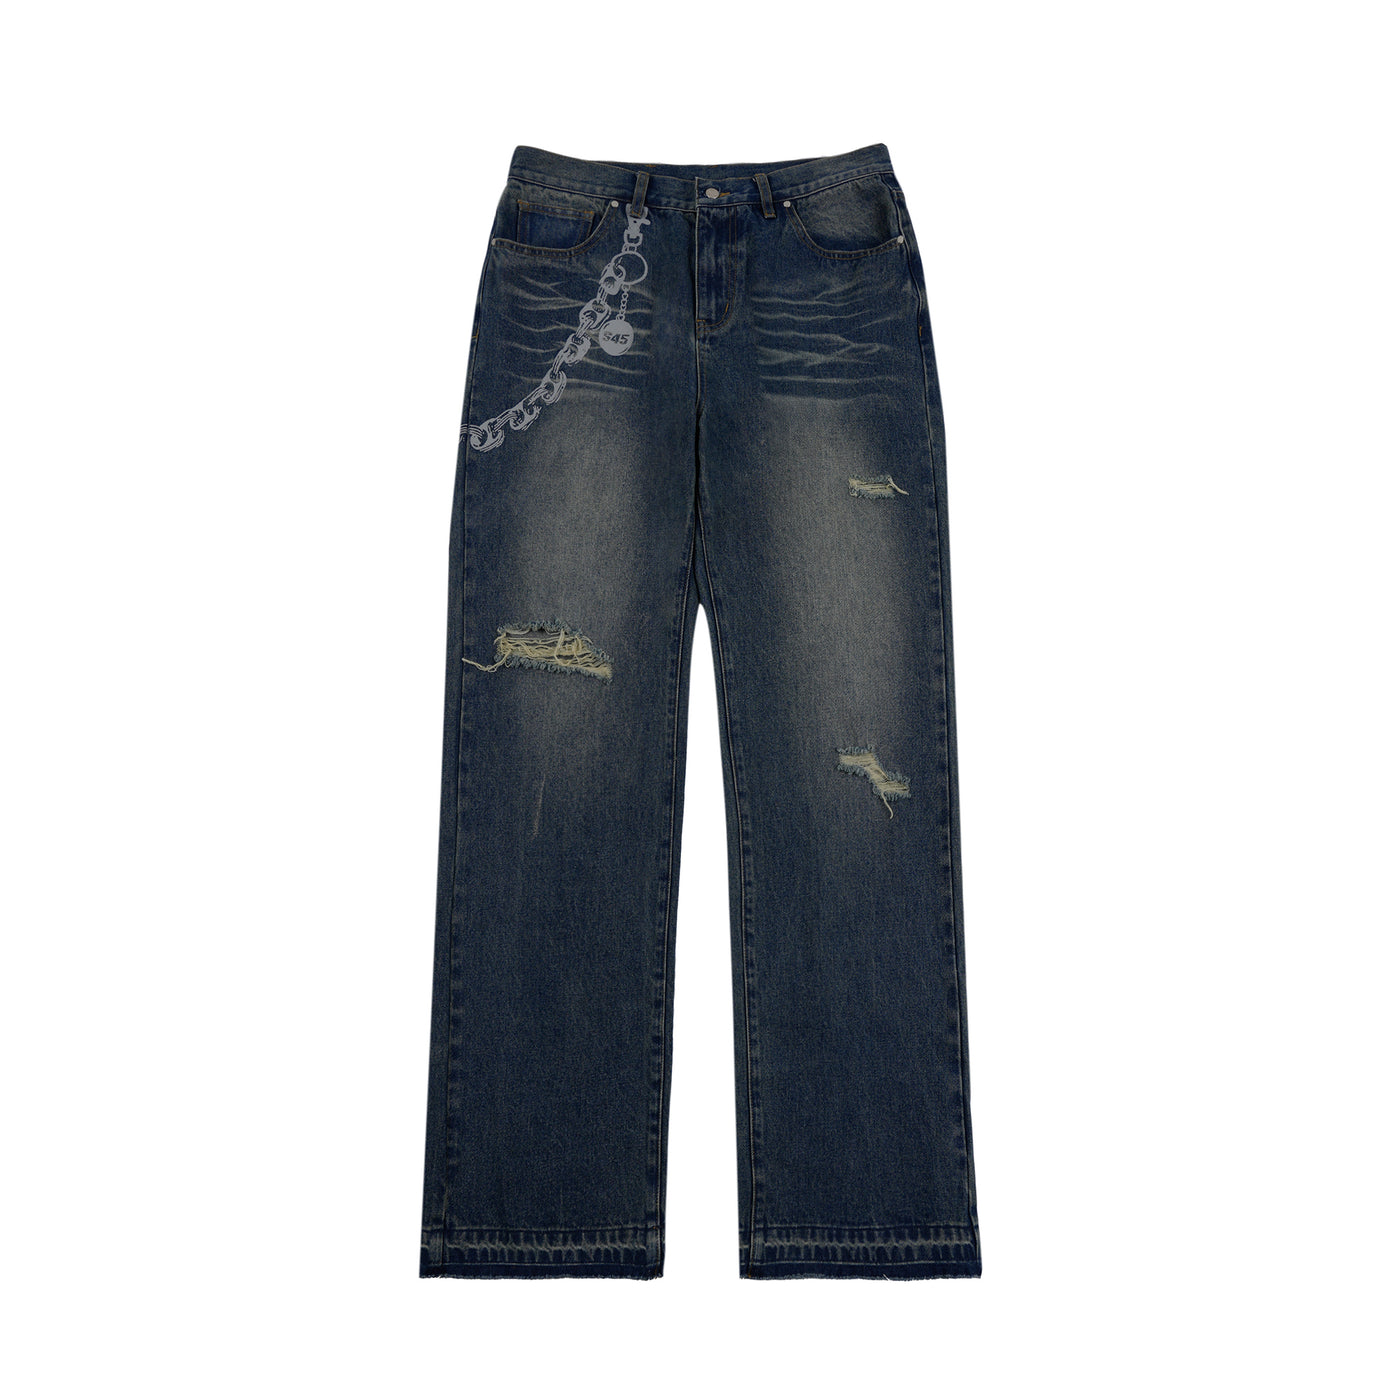 S45 Chain-Link Printed Ripped Hem Washed Jeans | Face 3 Face